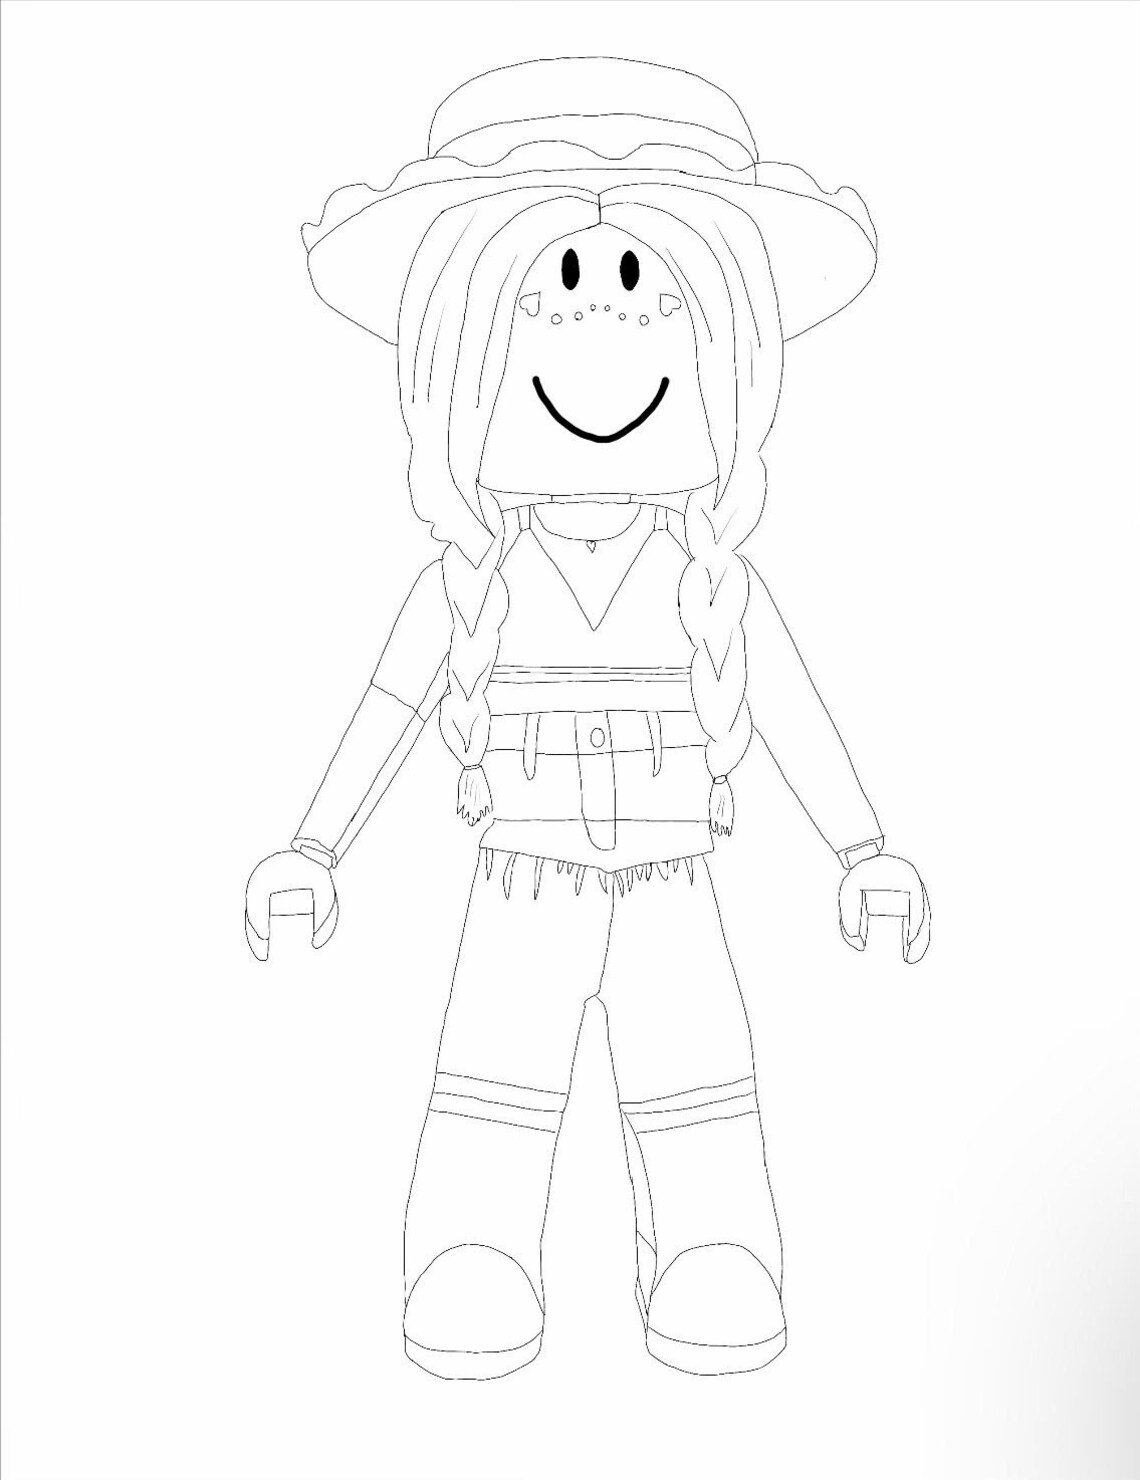 Aesthetic Roblox Avatar Coloring Page - Etsy